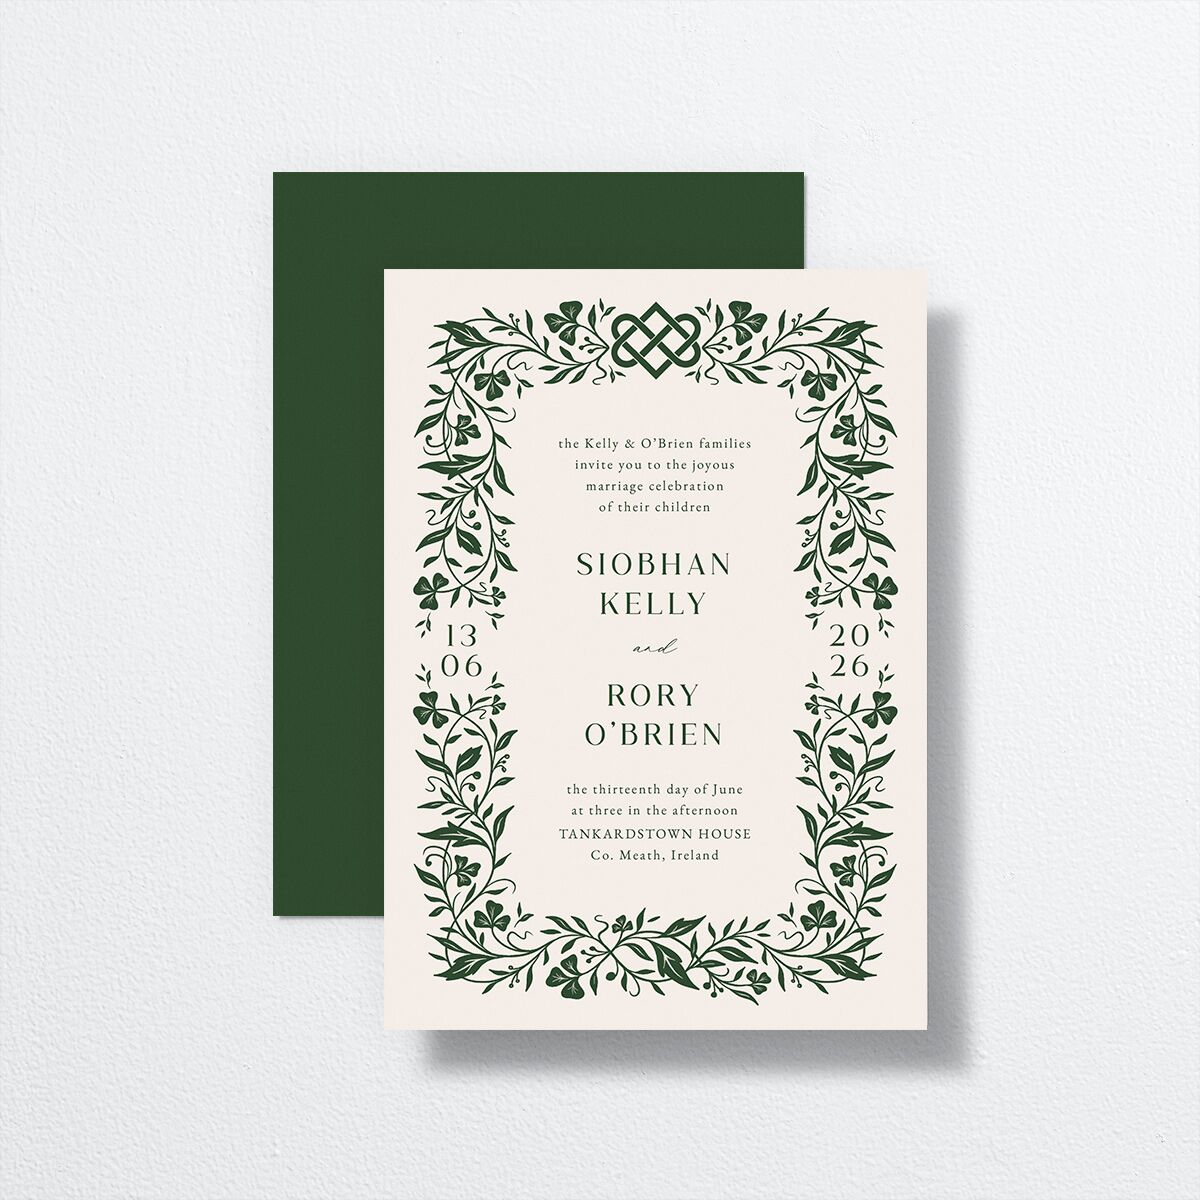 Celtic Knot Wedding Invitations front-and-back in green